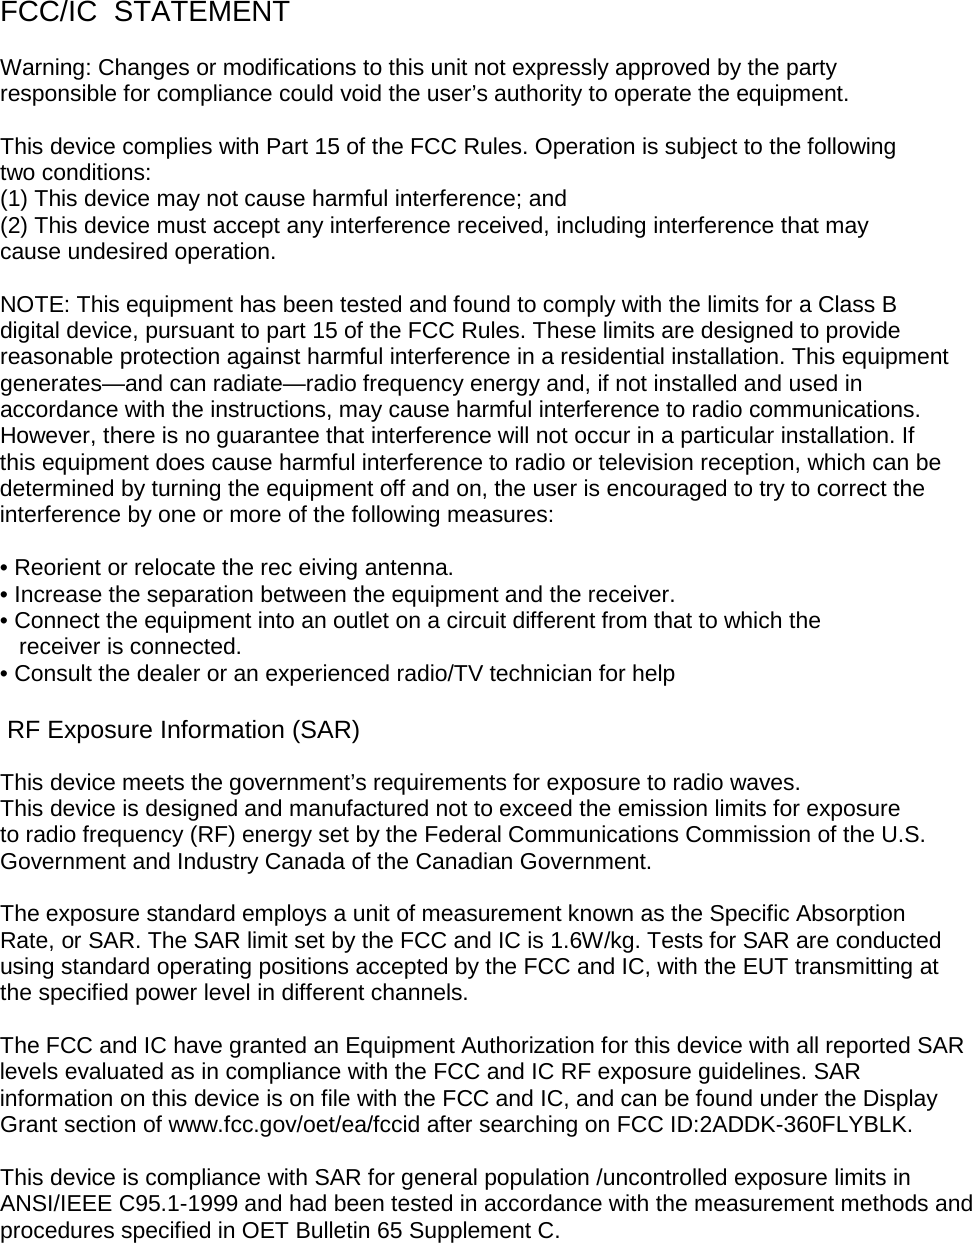 FCC/IC  STATEMENT  Warning: Changes or modifications to this unit not expressly approved by the party  responsible for compliance could void the user’s authority to operate the equipment.   This device complies with Part 15 of the FCC Rules. Operation is subject to the following  two conditions:  (1) This device may not cause harmful interference; and  (2) This device must accept any interference received, including interference that may  cause undesired operation.  NOTE: This equipment has been tested and found to comply with the limits for a Class B  digital device, pursuant to part 15 of the FCC Rules. These limits are designed to provide  reasonable protection against harmful interference in a residential installation. This equipment  generates—and can radiate—radio frequency energy and, if not installed and used in  accordance with the instructions, may cause harmful interference to radio communications.  However, there is no guarantee that interference will not occur in a particular installation. If  this equipment does cause harmful interference to radio or television reception, which can be  determined by turning the equipment off and on, the user is encouraged to try to correct the  interference by one or more of the following measures:  • Reorient or relocate the rec eiving antenna. • Increase the separation between the equipment and the receiver. • Connect the equipment into an outlet on a circuit different from that to which the     receiver is connected. • Consult the dealer or an experienced radio/TV technician for help   RF Exposure Information (SAR) This device meets the government’s requirements for exposure to radio waves. This device is designed and manufactured not to exceed the emission limits for exposure  to radio frequency (RF) energy set by the Federal Communications Commission of the U.S.  Government and Industry Canada of the Canadian Government.  The exposure standard employs a unit of measurement known as the Specific Absorption  Rate, or SAR. The SAR limit set by the FCC and IC is 1.6W/kg. Tests for SAR are conducted  using standard operating positions accepted by the FCC and IC, with the EUT transmitting at  the specified power level in different channels.   The FCC and IC have granted an Equipment Authorization for this device with all reported SAR levels evaluated as in compliance with the FCC and IC RF exposure guidelines. SAR information on this device is on file with the FCC and IC, and can be found under the Display Grant section of www.fcc.gov/oet/ea/fccid after searching on FCC ID:2ADDK-360FLYBLK.  This device is compliance with SAR for general population /uncontrolled exposure limits in ANSI/IEEE C95.1-1999 and had been tested in accordance with the measurement methods and  procedures specified in OET Bulletin 65 Supplement C.     